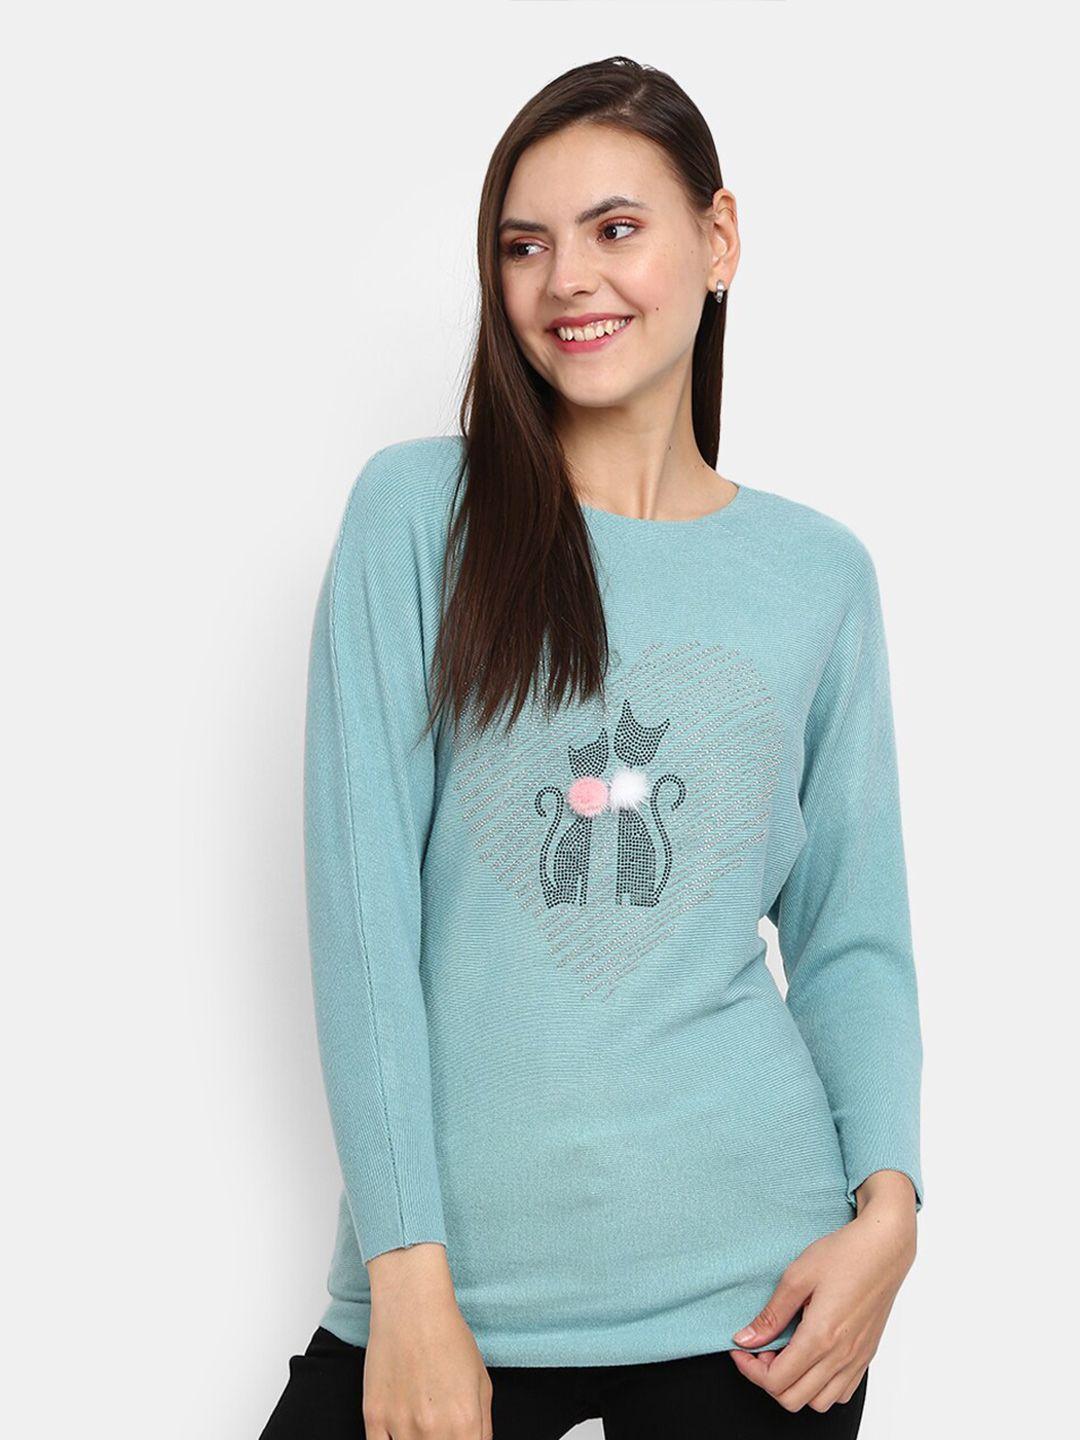 v-mart graphic printed round neck cotton  pullover sweaters with embellished detail